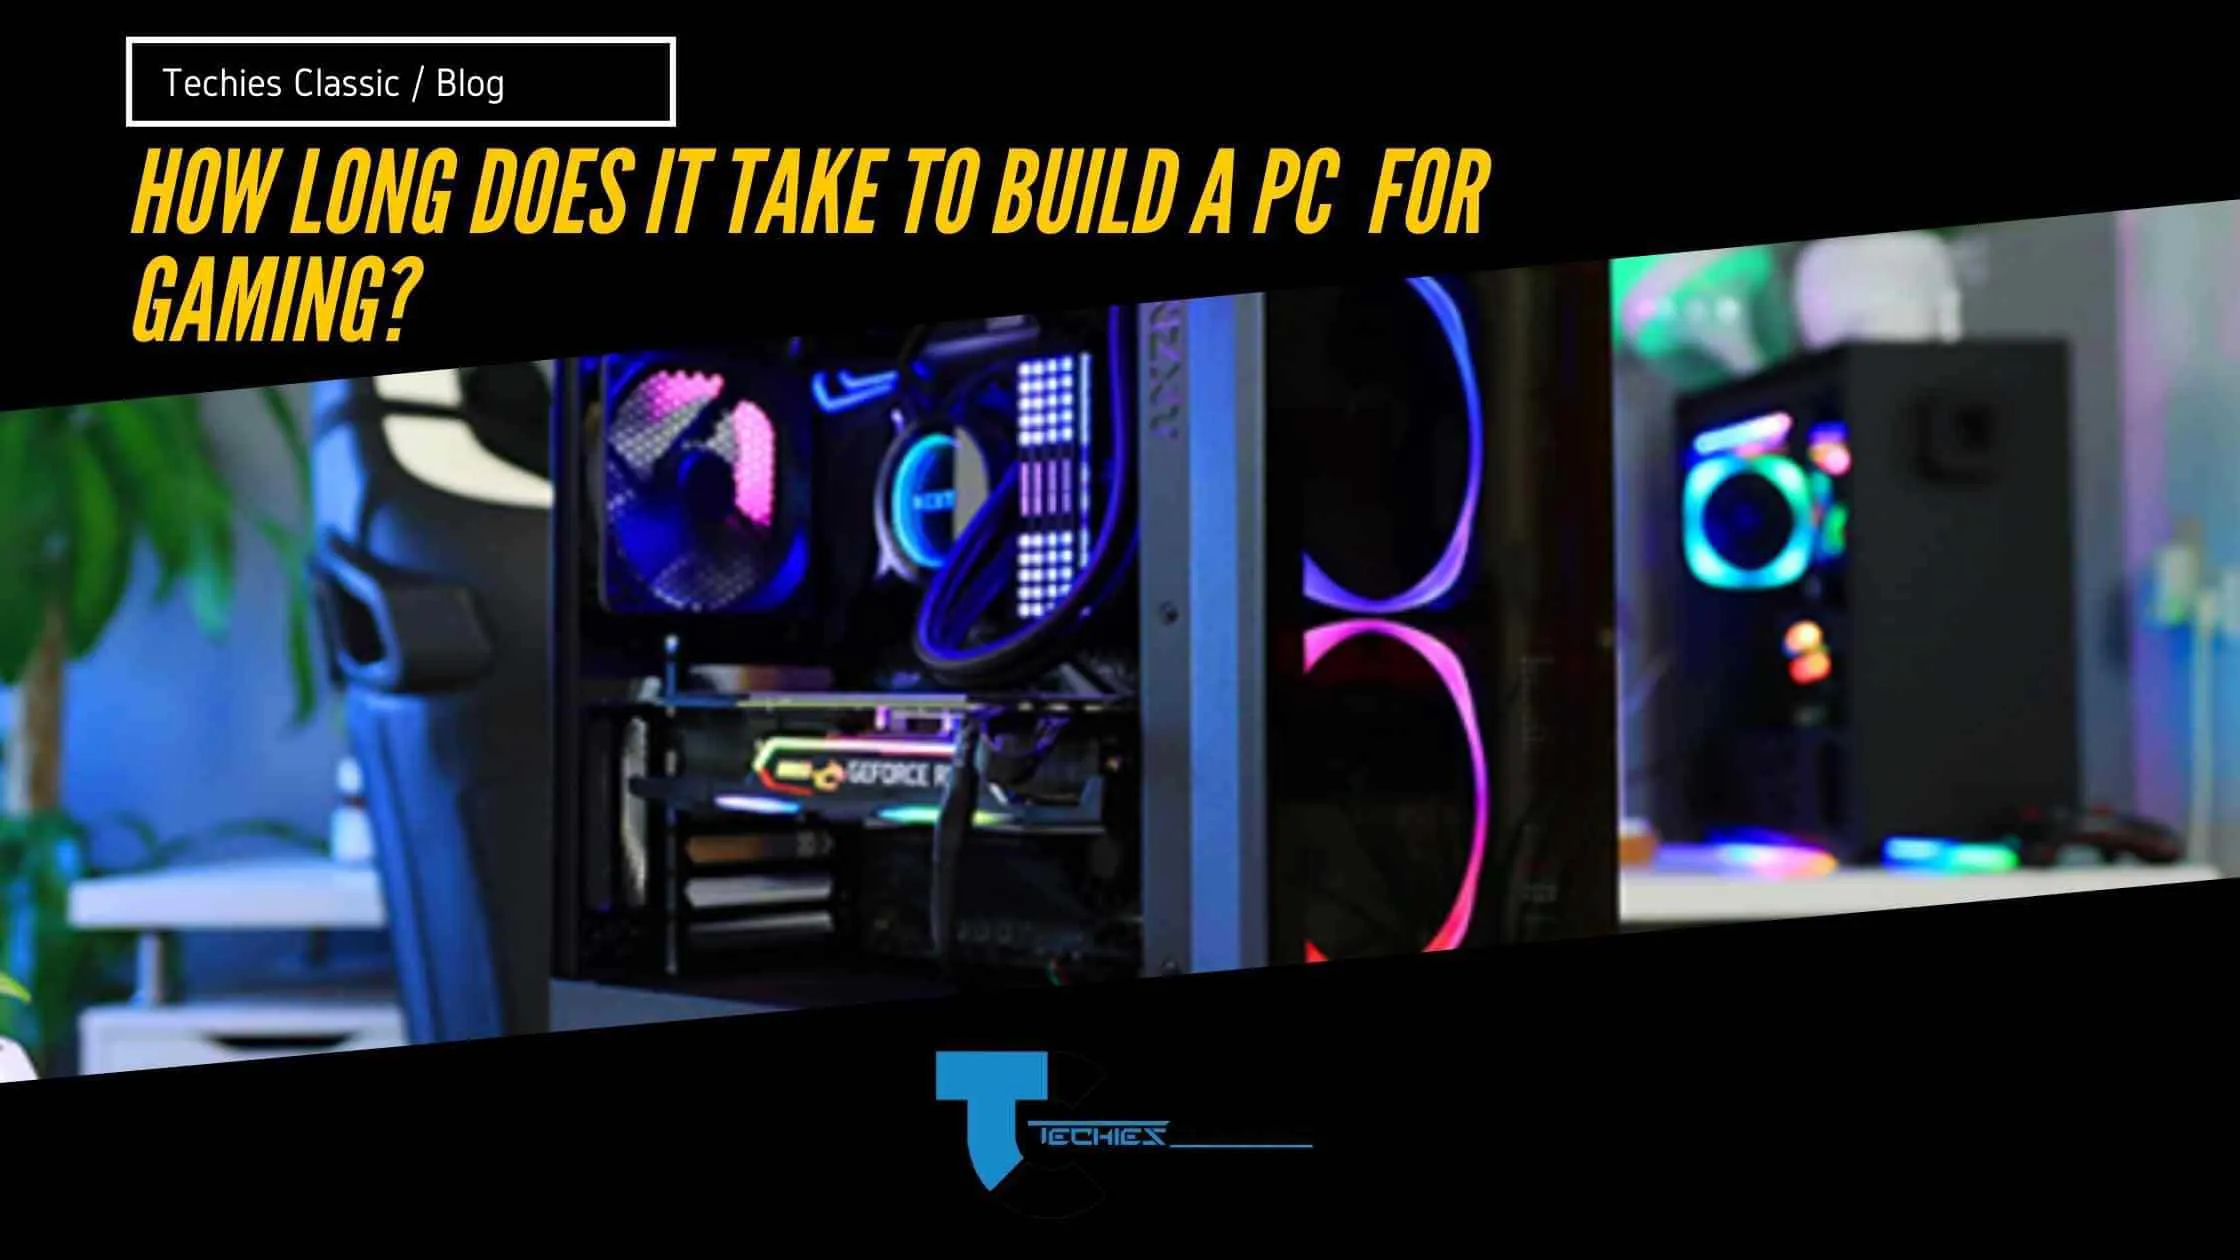 How Long Does It Take To Build A Pc?